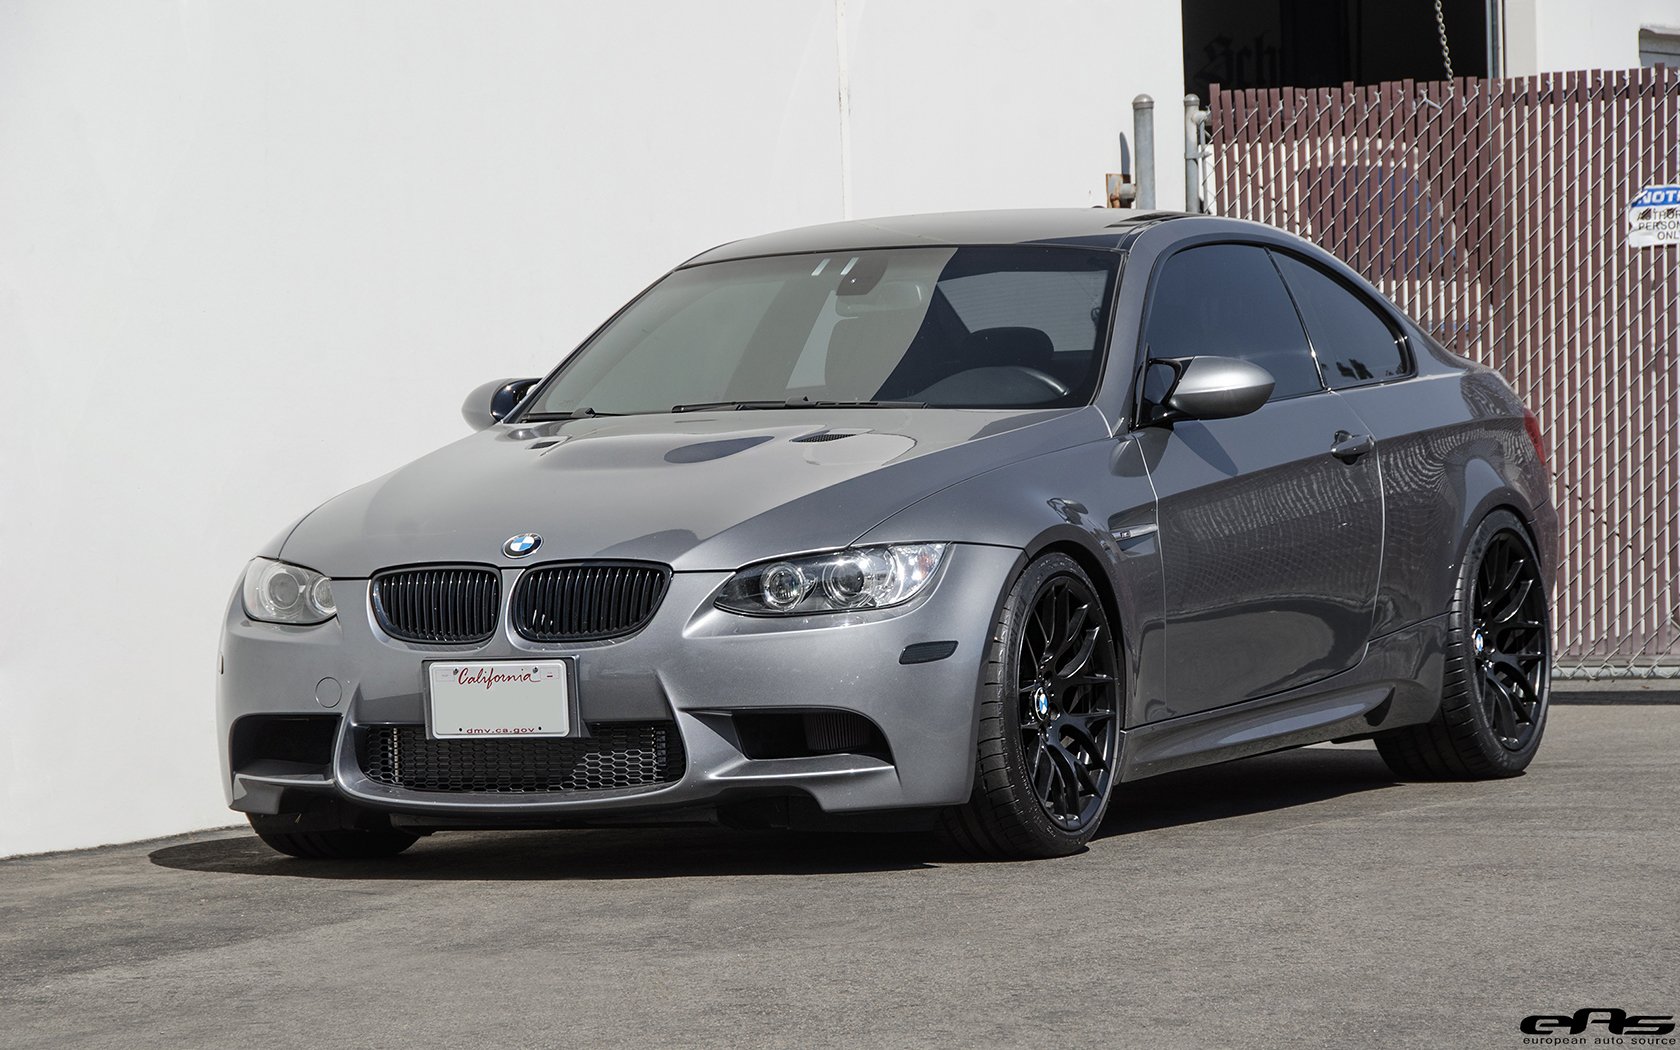 Space Grey Metallic BMW E92 M3 Gets Supercharged And Tuned At European Auto Source 13